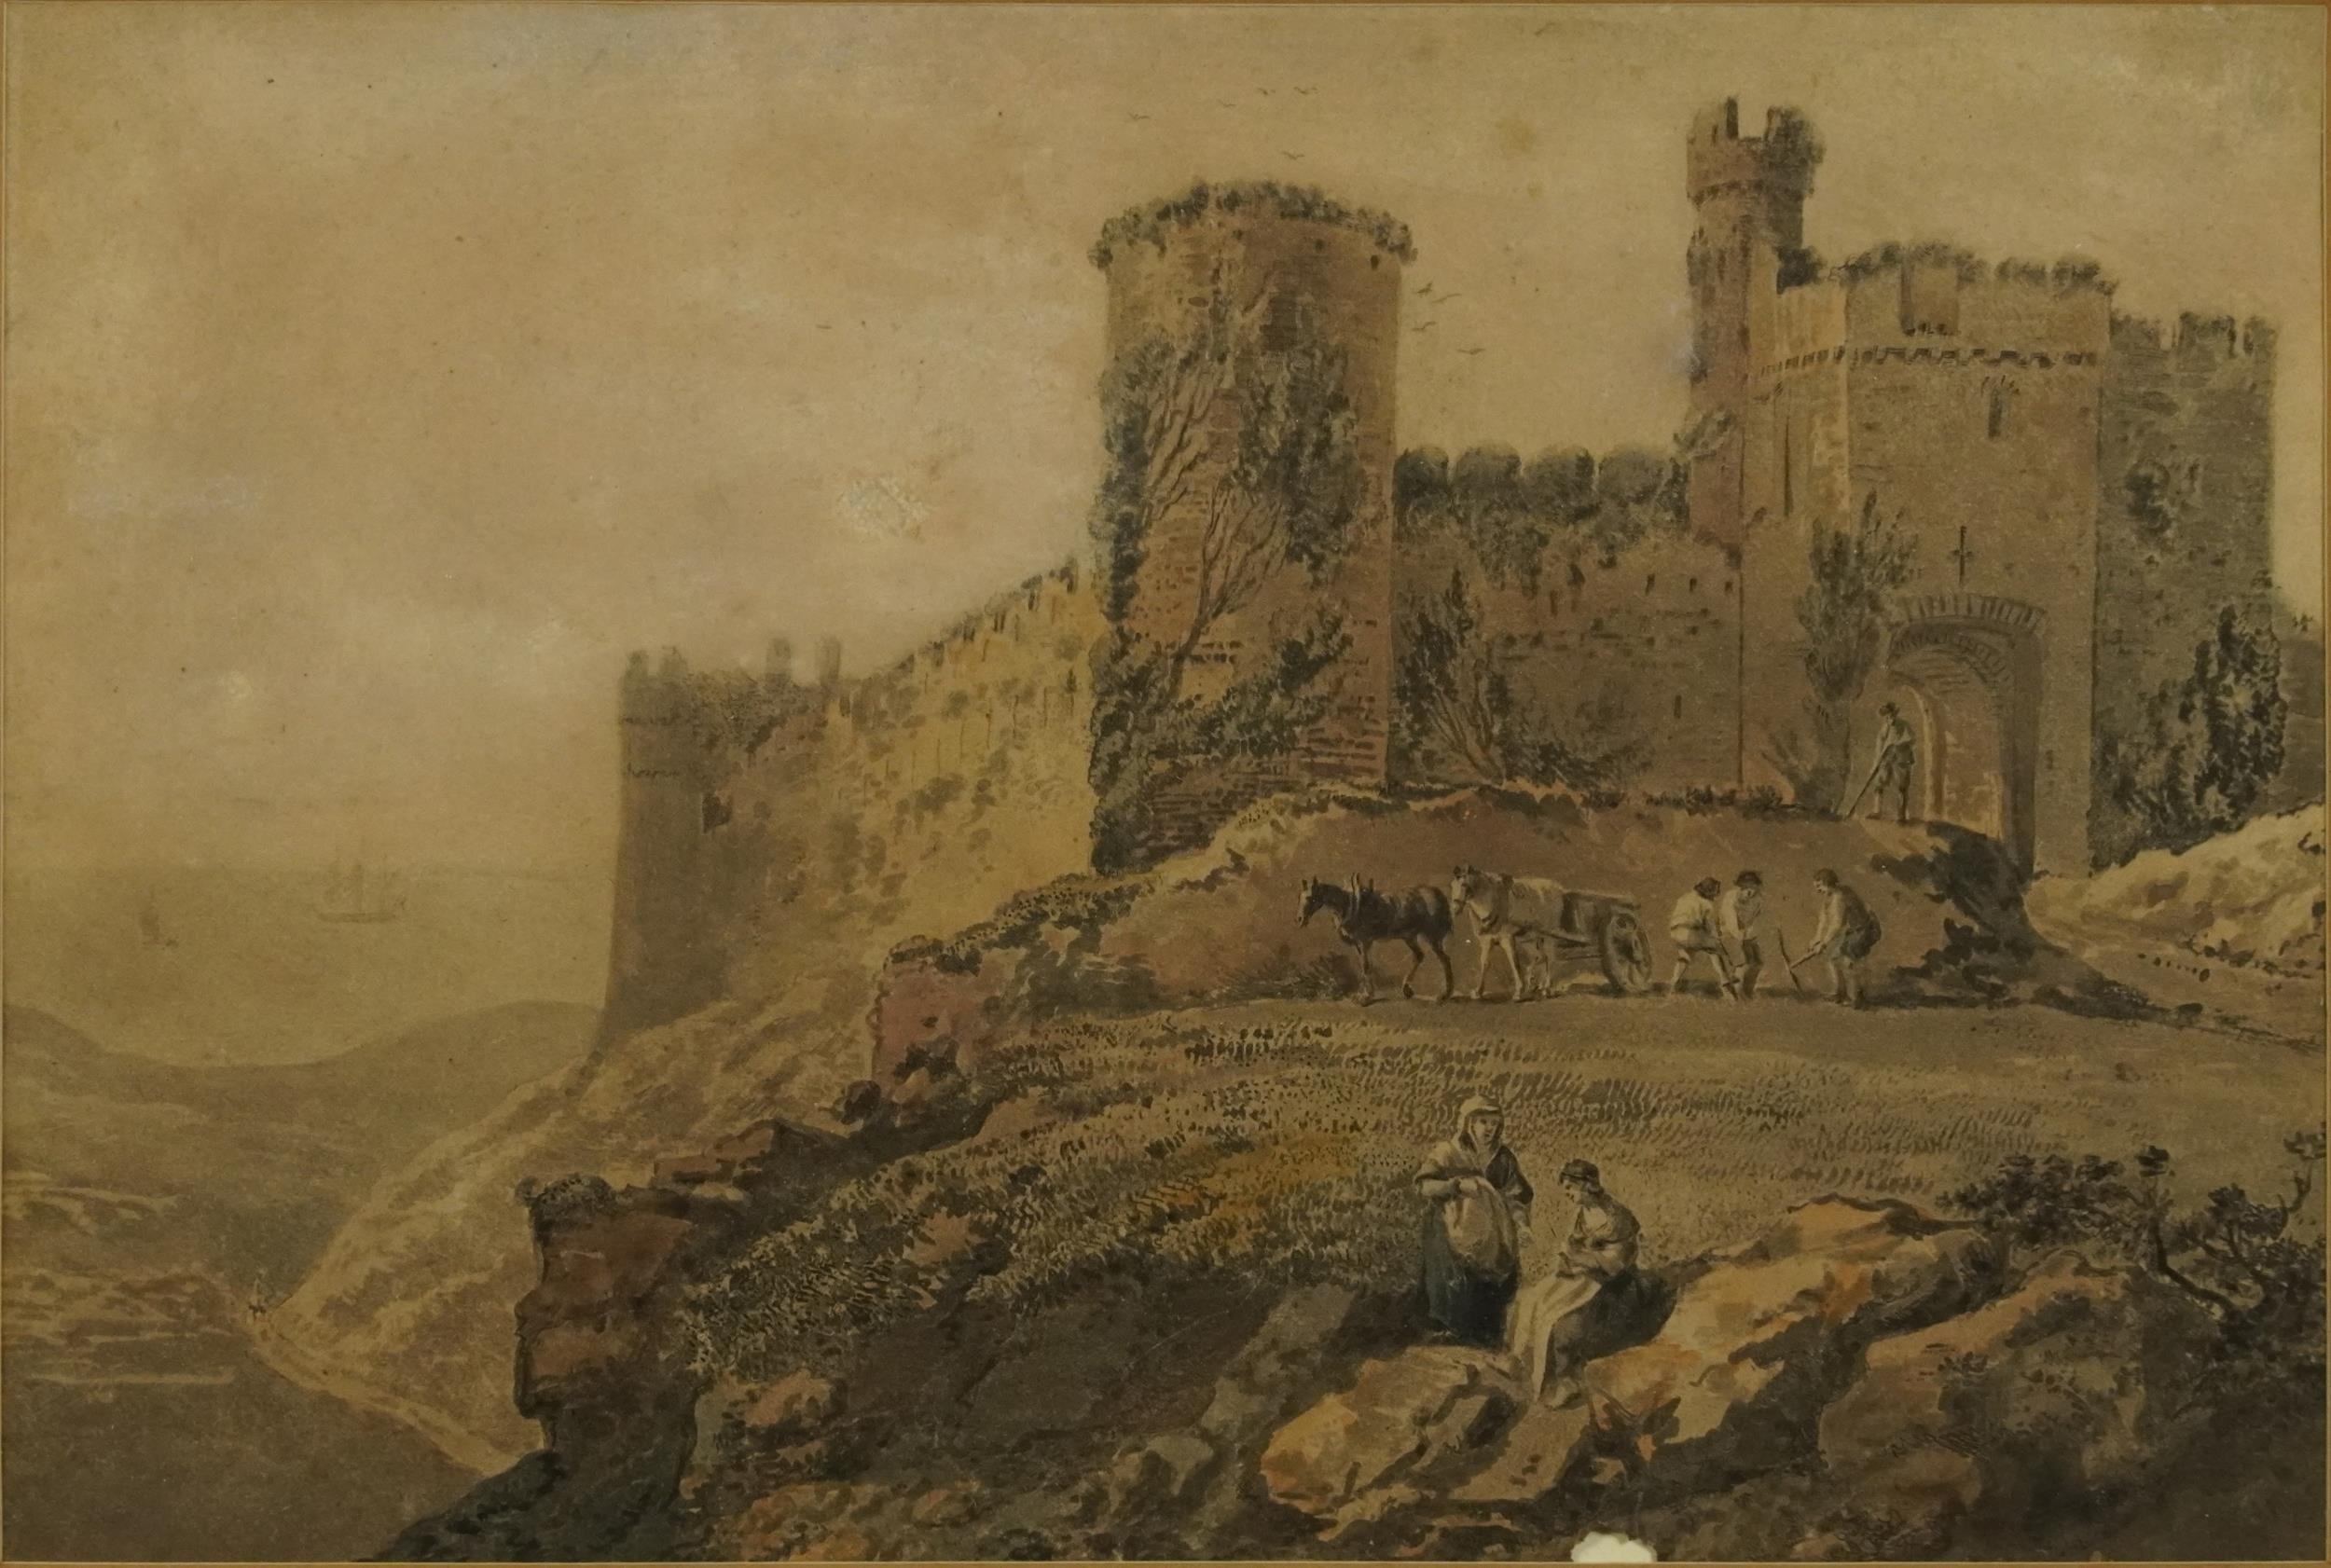 Attributed to John Alexander Gresse - Manorbier Castle, Pembrokeshire, 18th century ink and